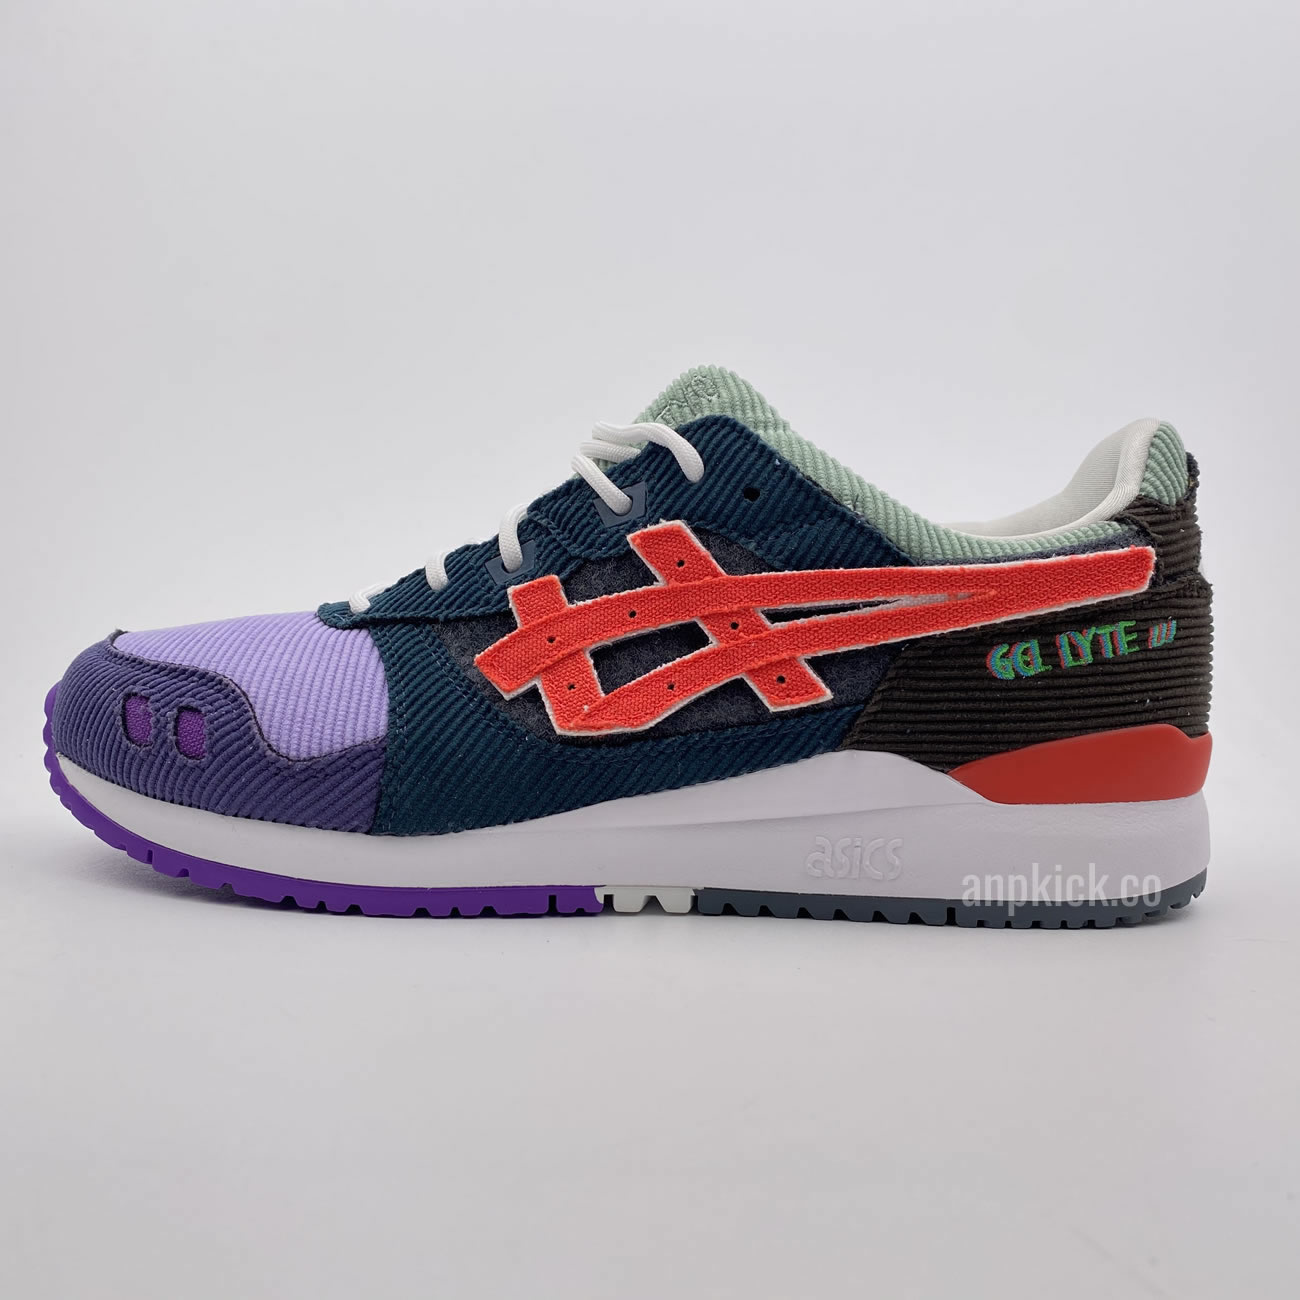 Sean Wotherspoon Atmos Asics Gel Lyte Og Shoes Multi 1203a019 000 (2) - newkick.org